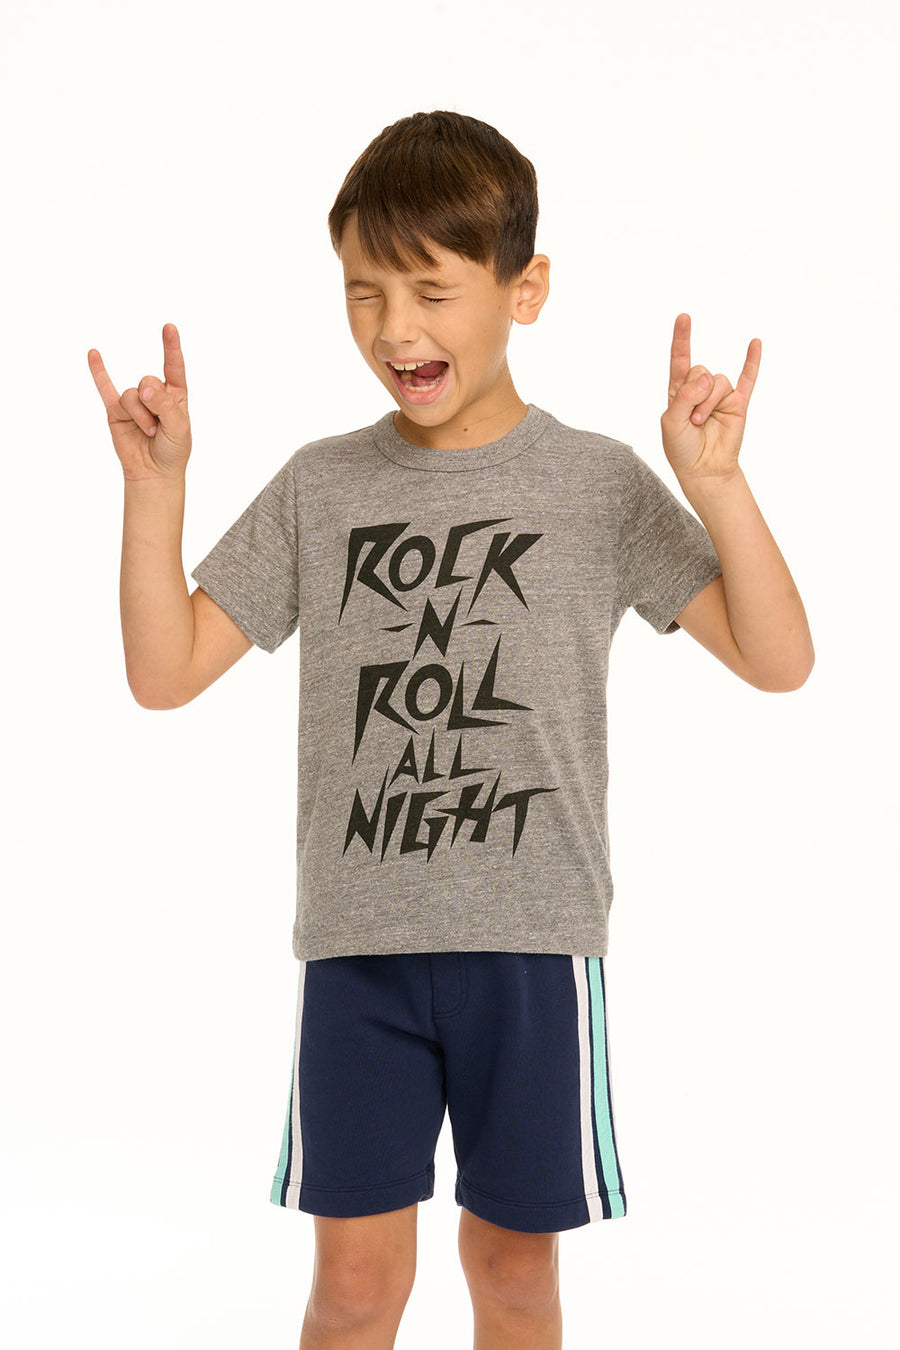 Rock All Night Tee BOYS chaserbrand